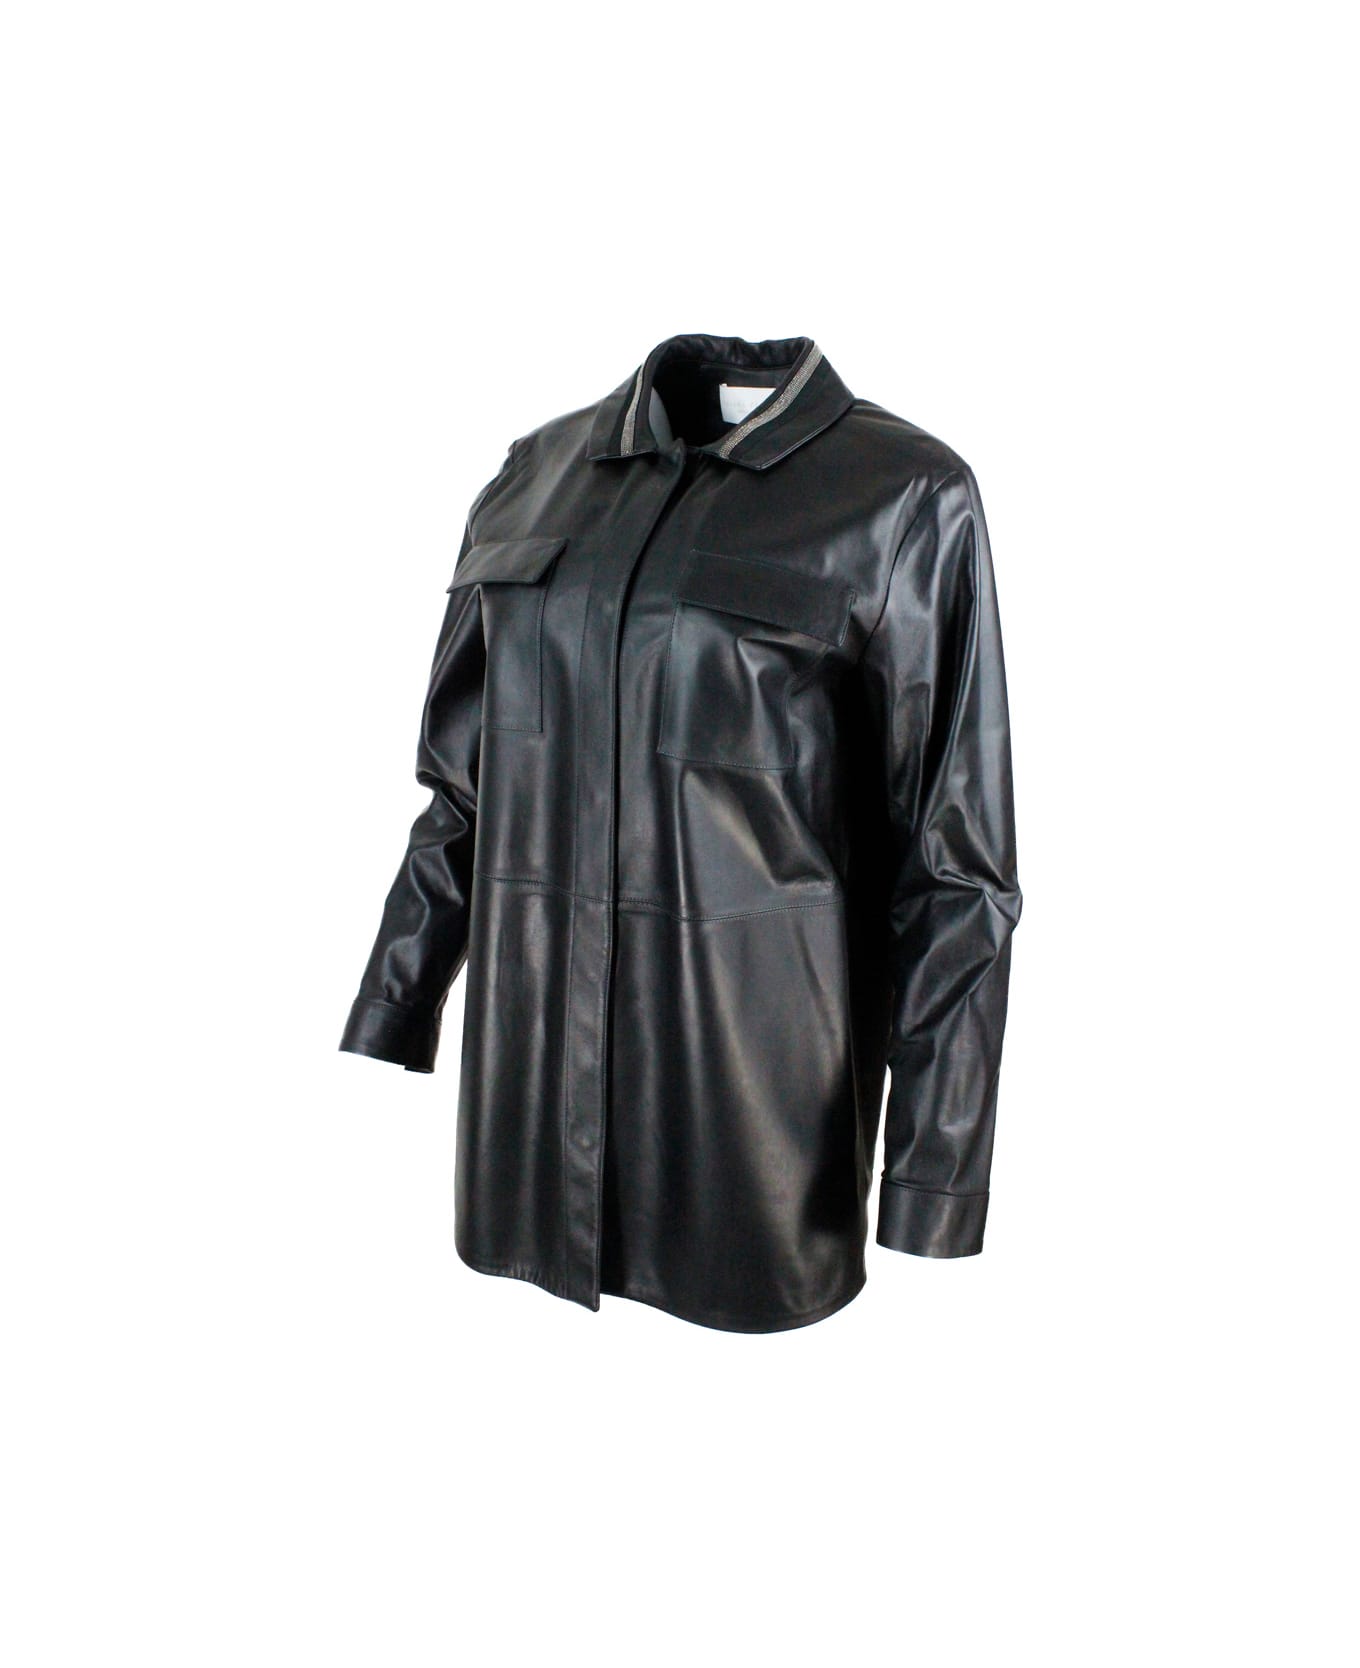 Fabiana Filippi Leather Shirt Jacket With Button Closure, With Belt And With Monile On The Collar - Black